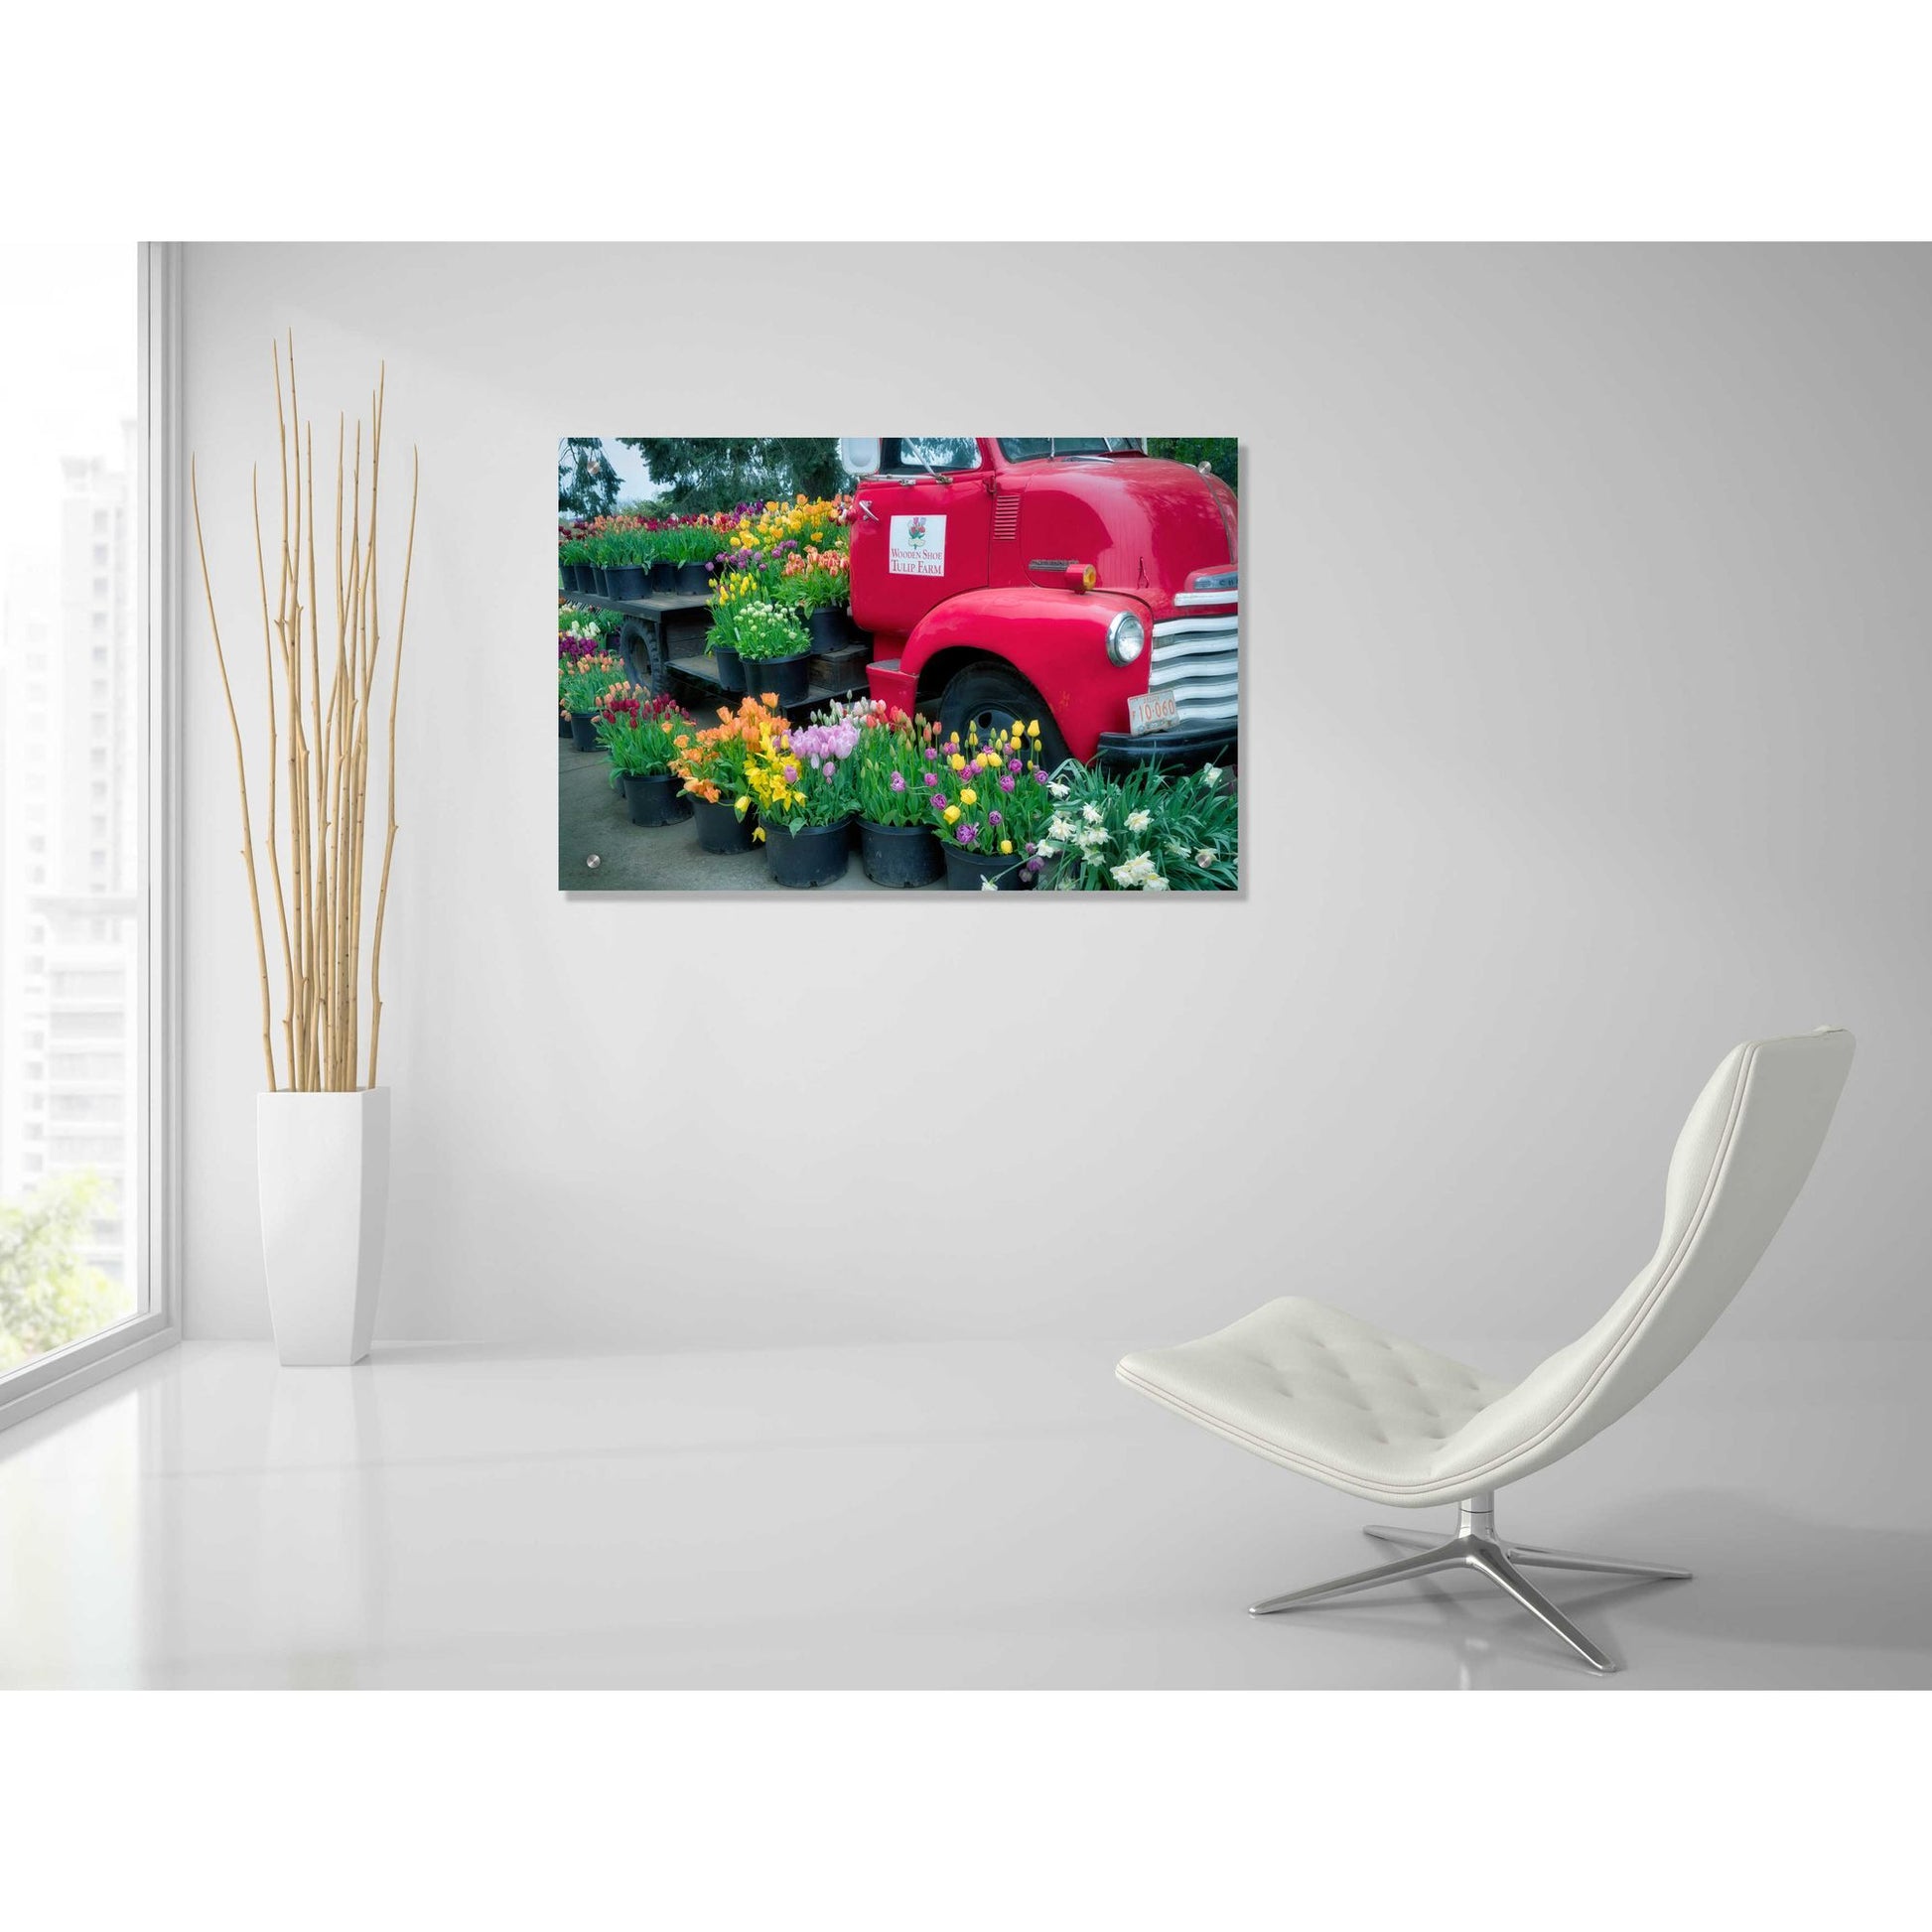 Epic Art 'Floral Truck' by Dennis Frates, Acrylic Glass Wall Art,36x24